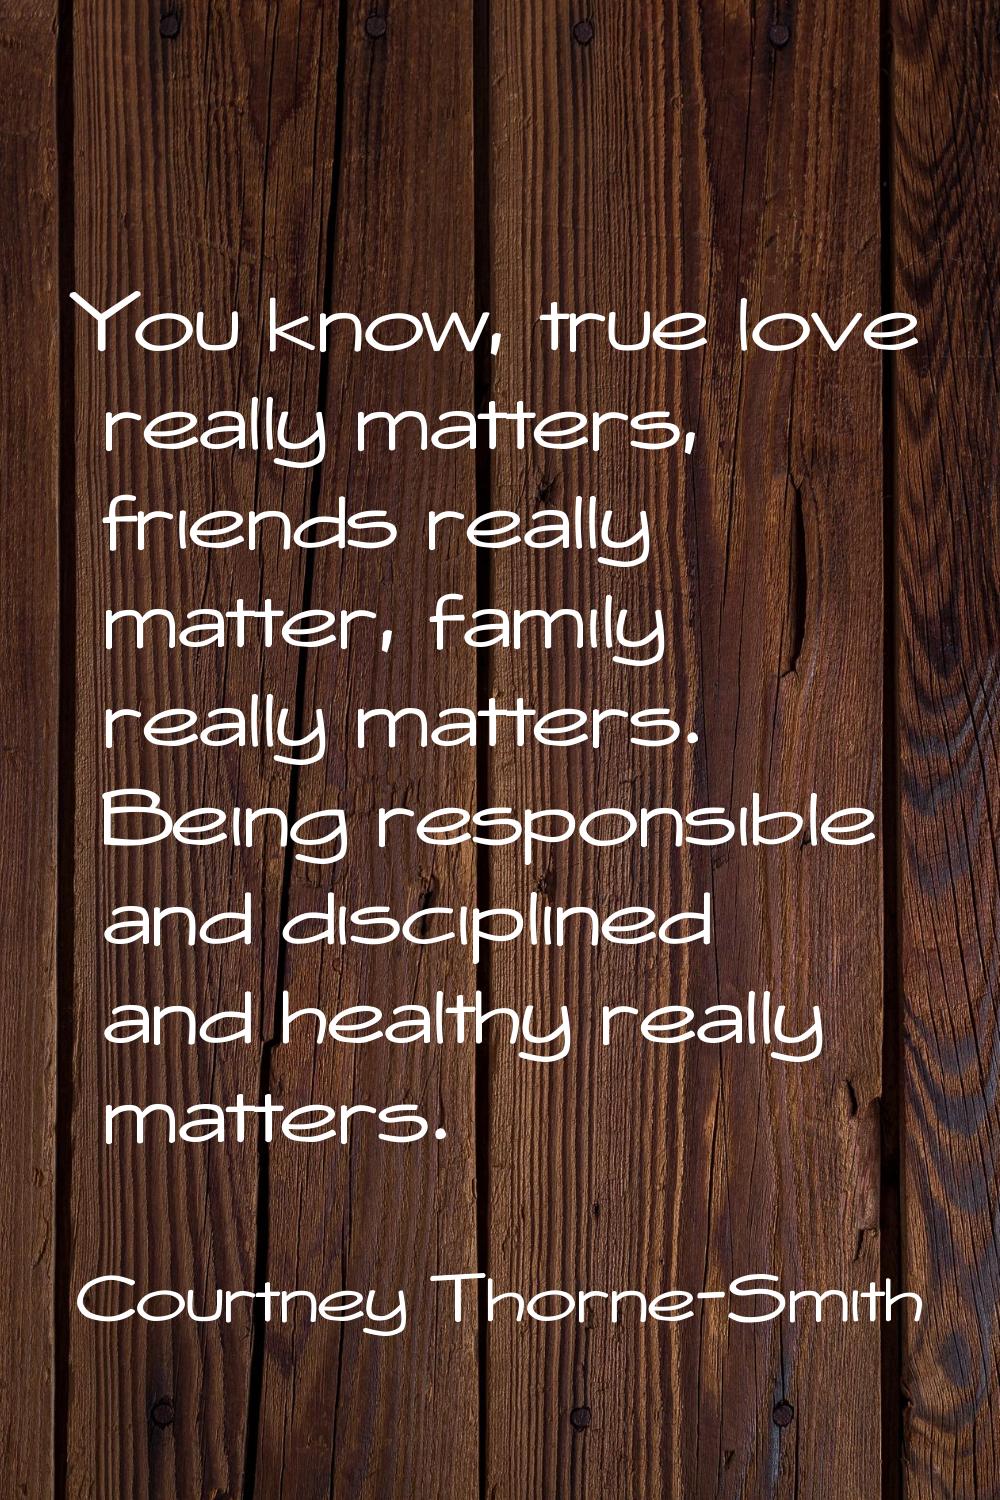 You know, true love really matters, friends really matter, family really matters. Being responsible